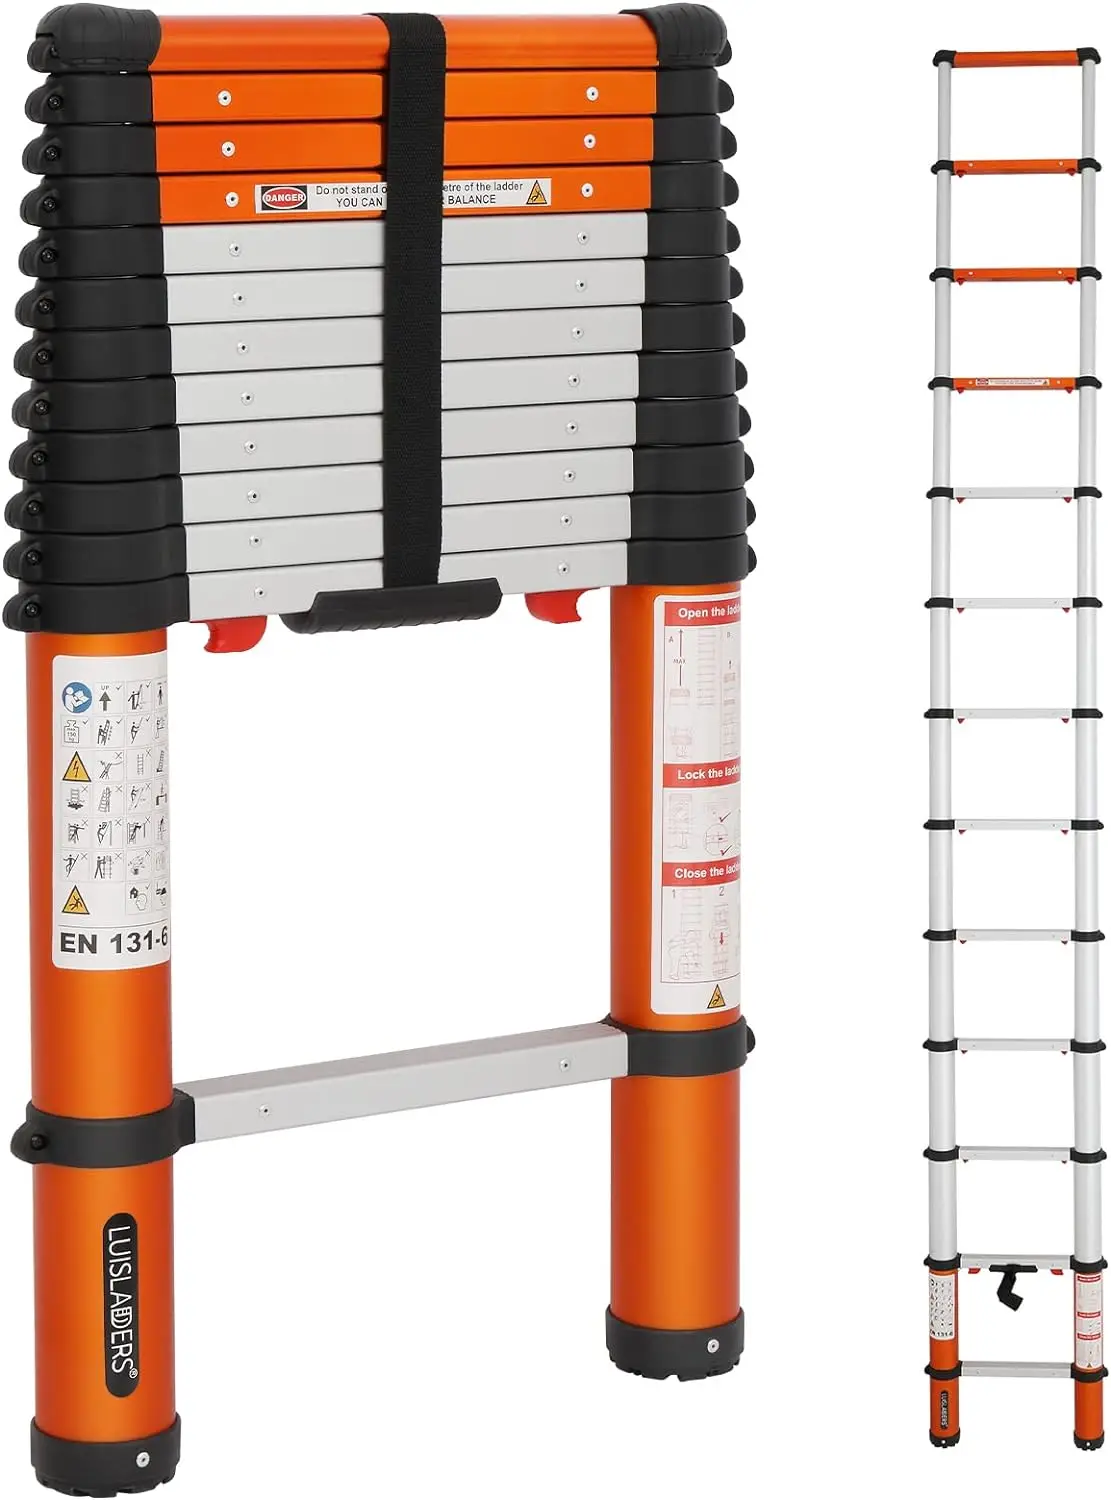 

LUISLADDERS Telescoping Ladder Multi-Use Telescopic Extension Ladder One-Button Retraction Anti-Pinch and Anti-Slip 330 Lb